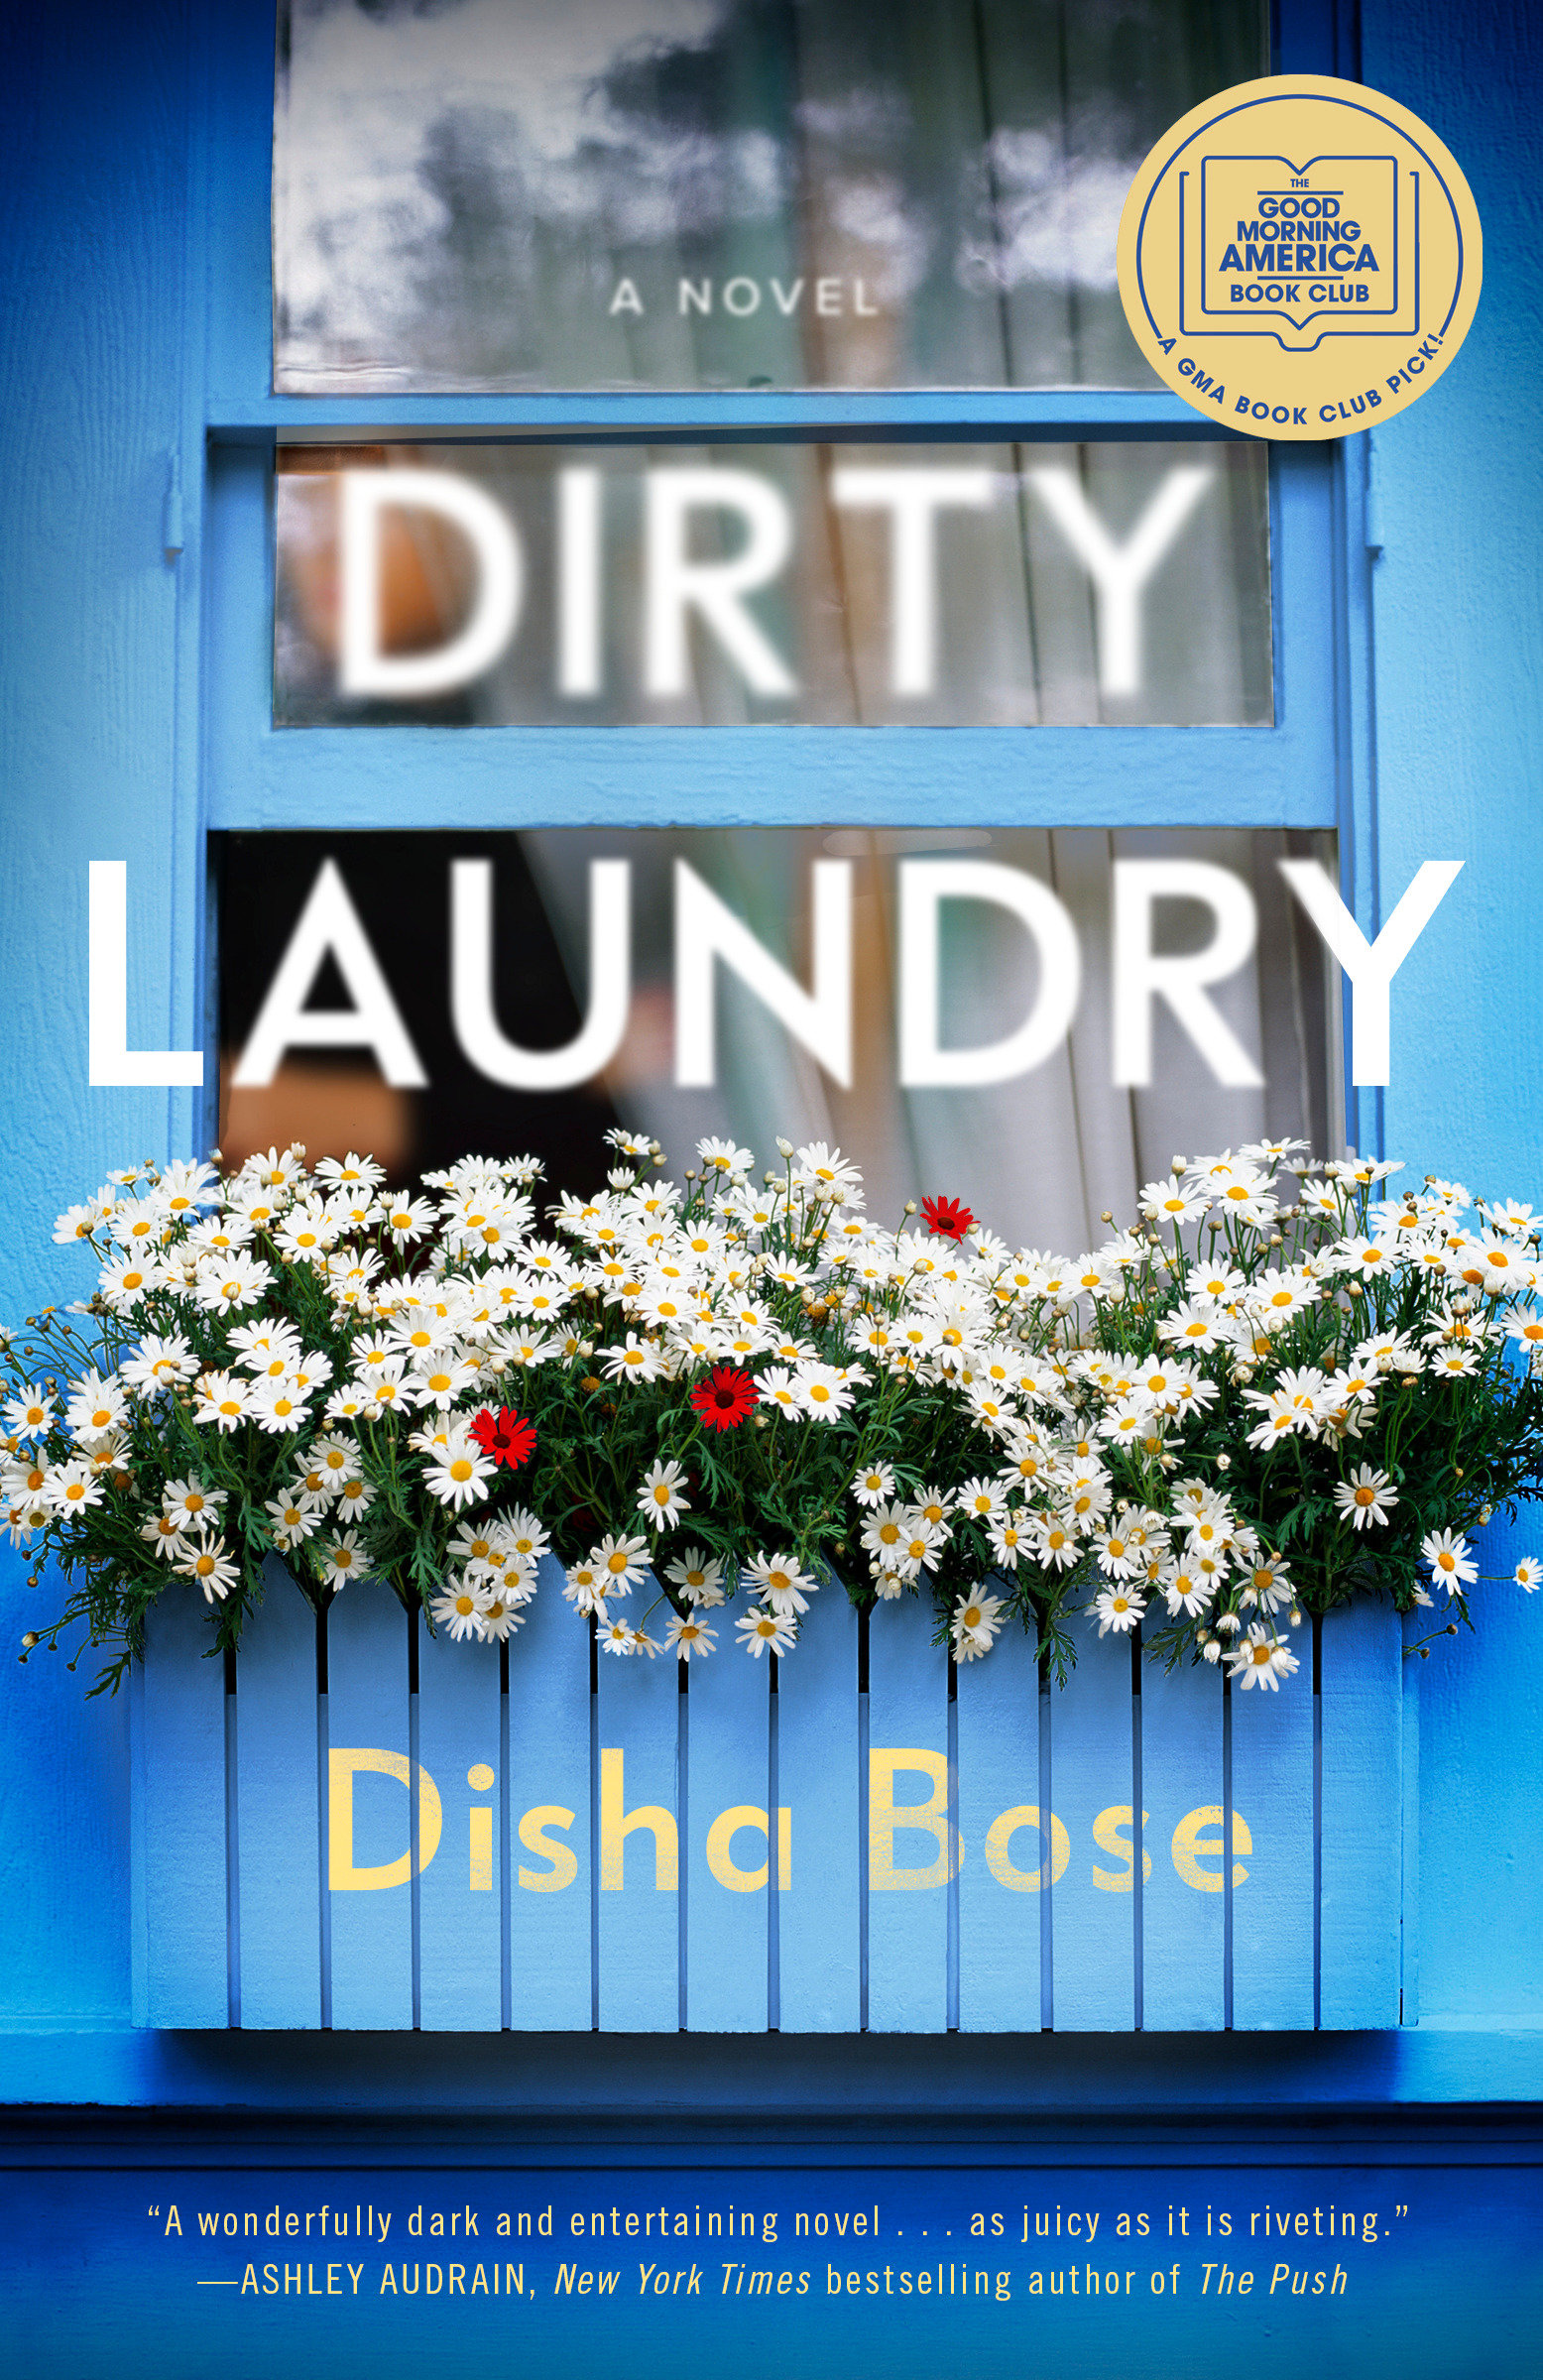 Dirty Laundry cover image